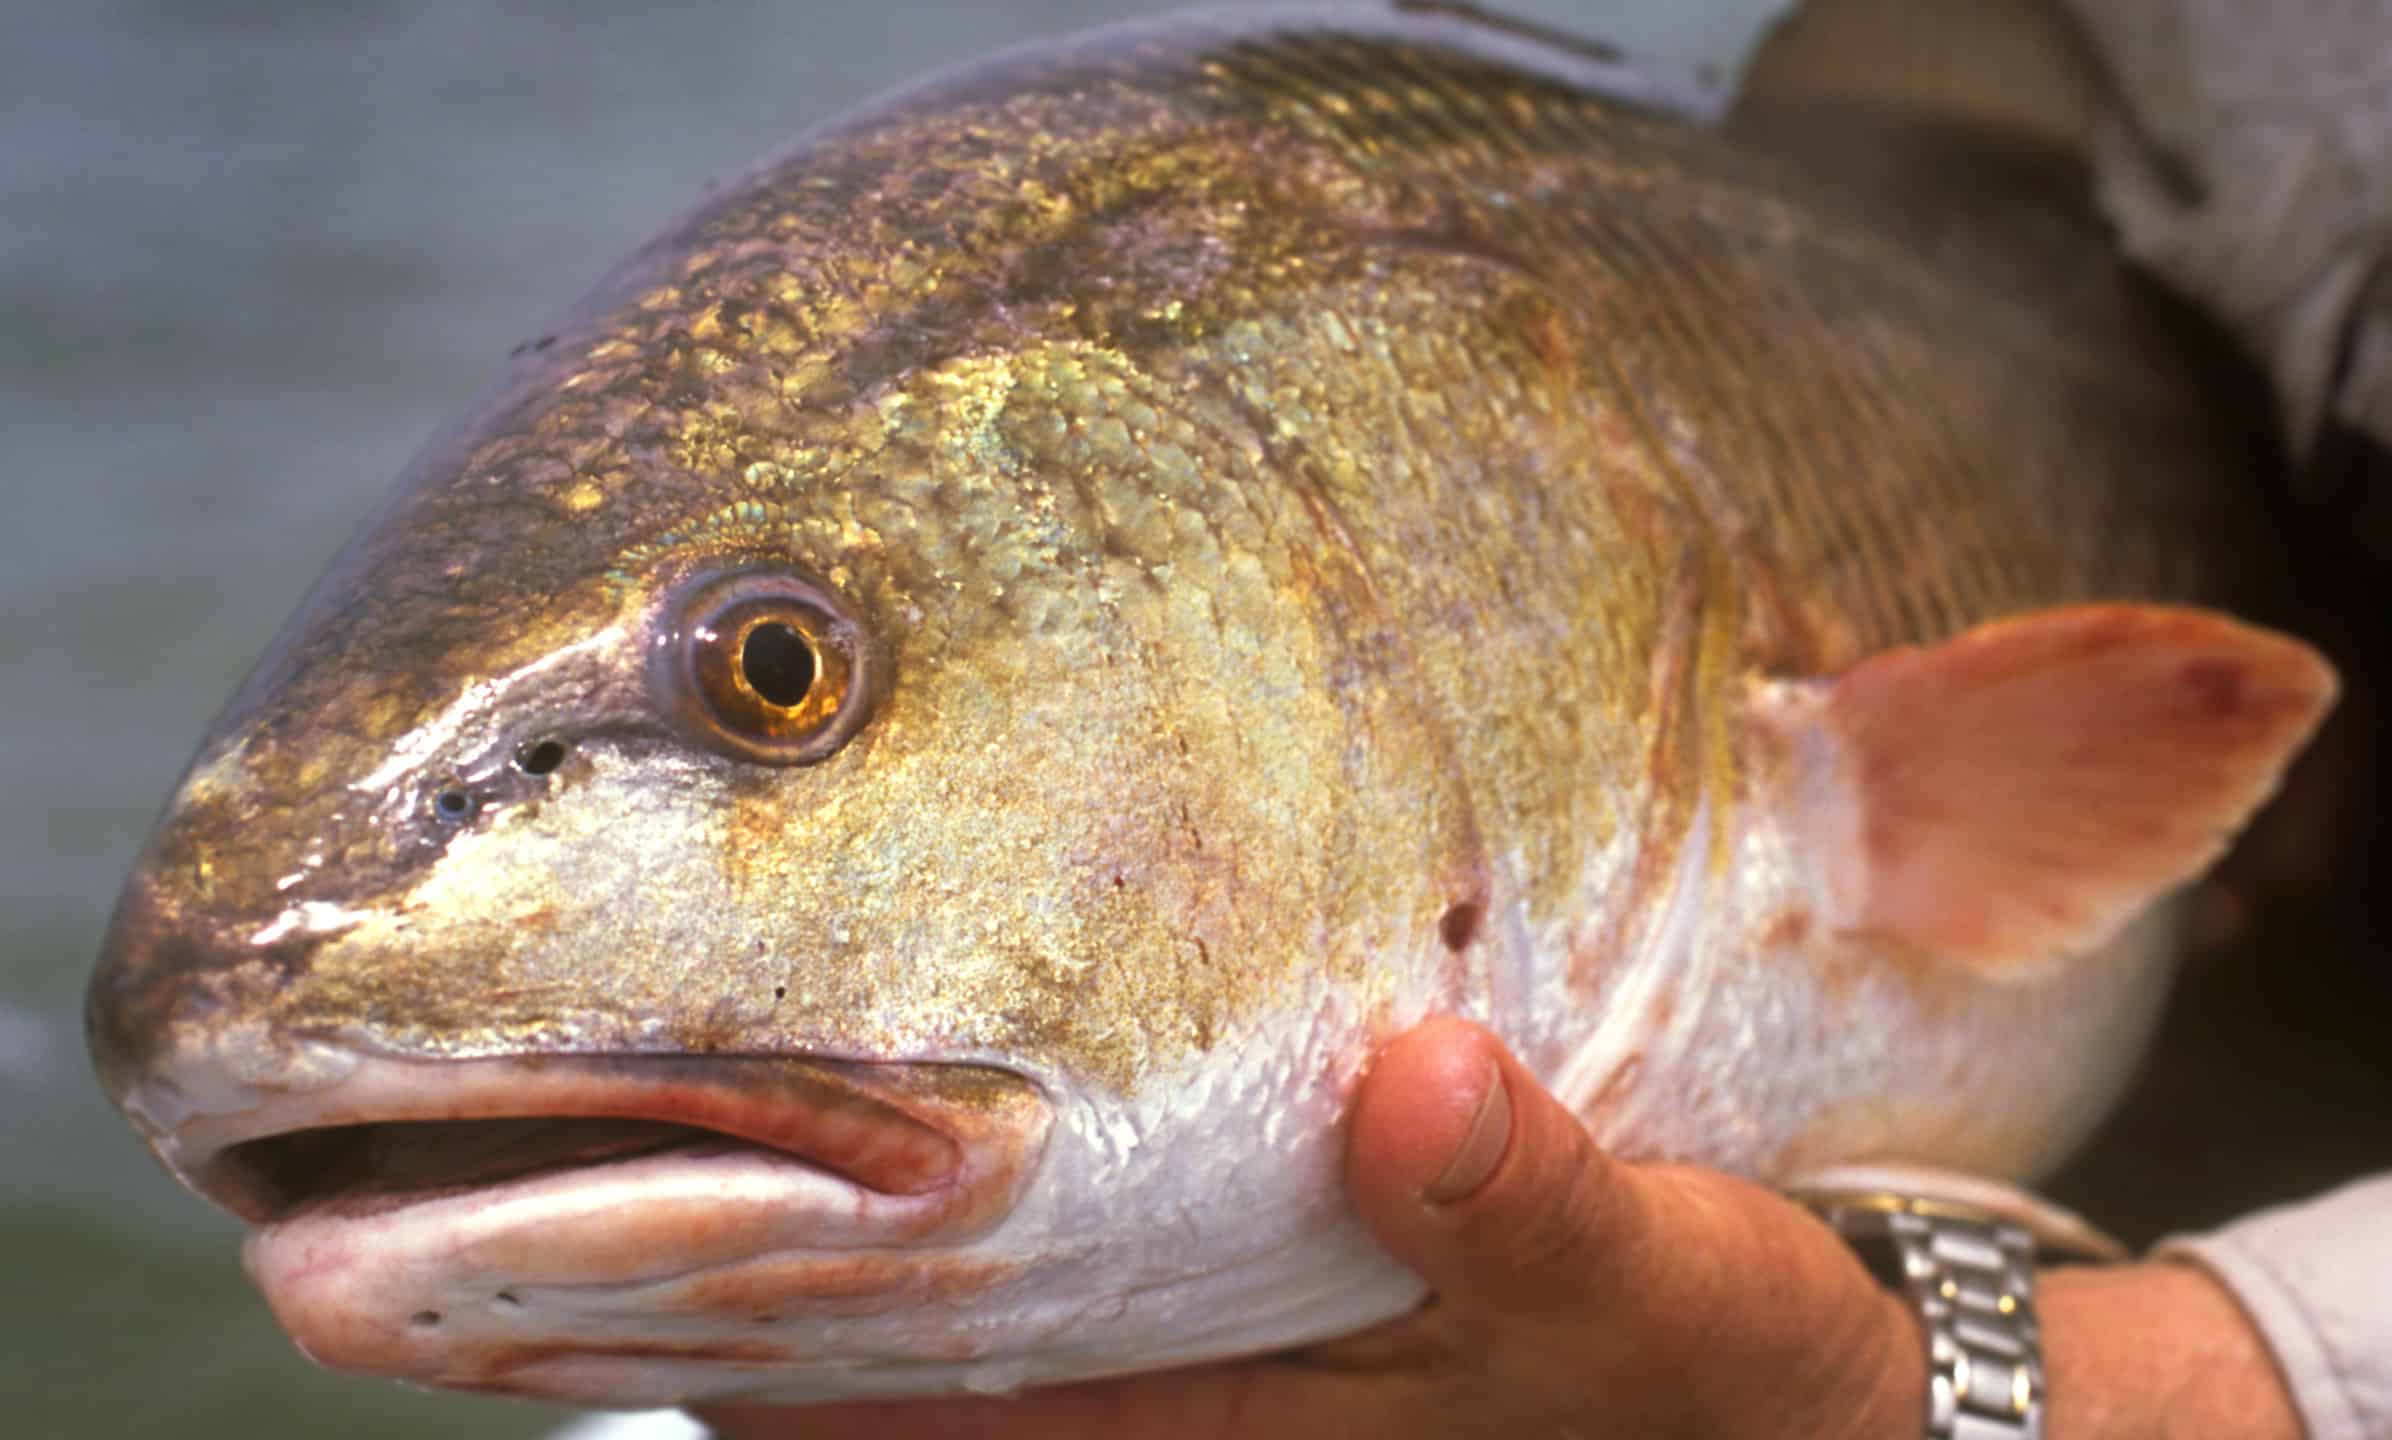 Sciaenops ocellatus also known as the red drum, redfish, channel bass and spottail bass